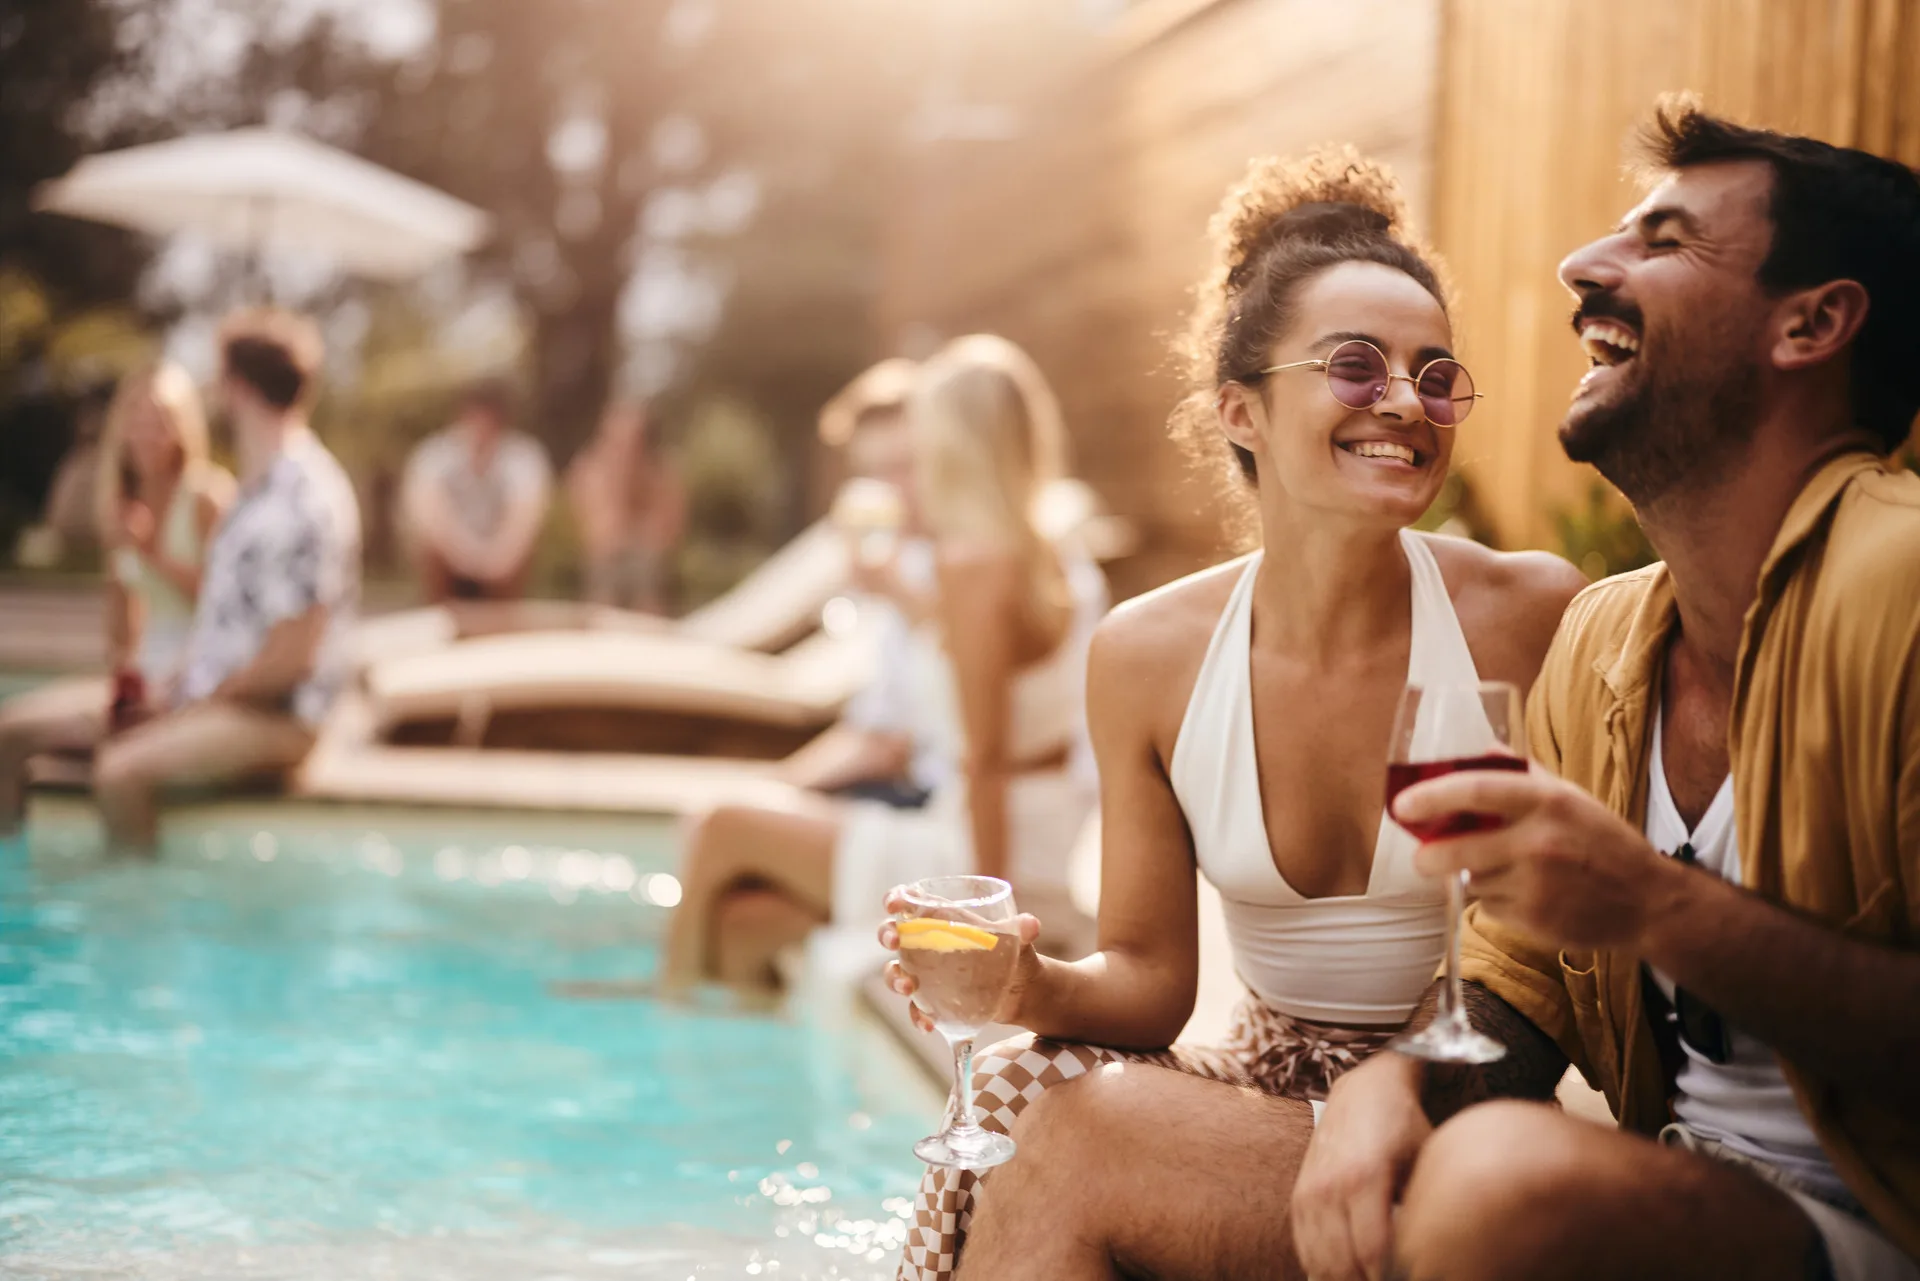 Young cheerful couple enjoying in conversation and drinks during a pool party with their friends.